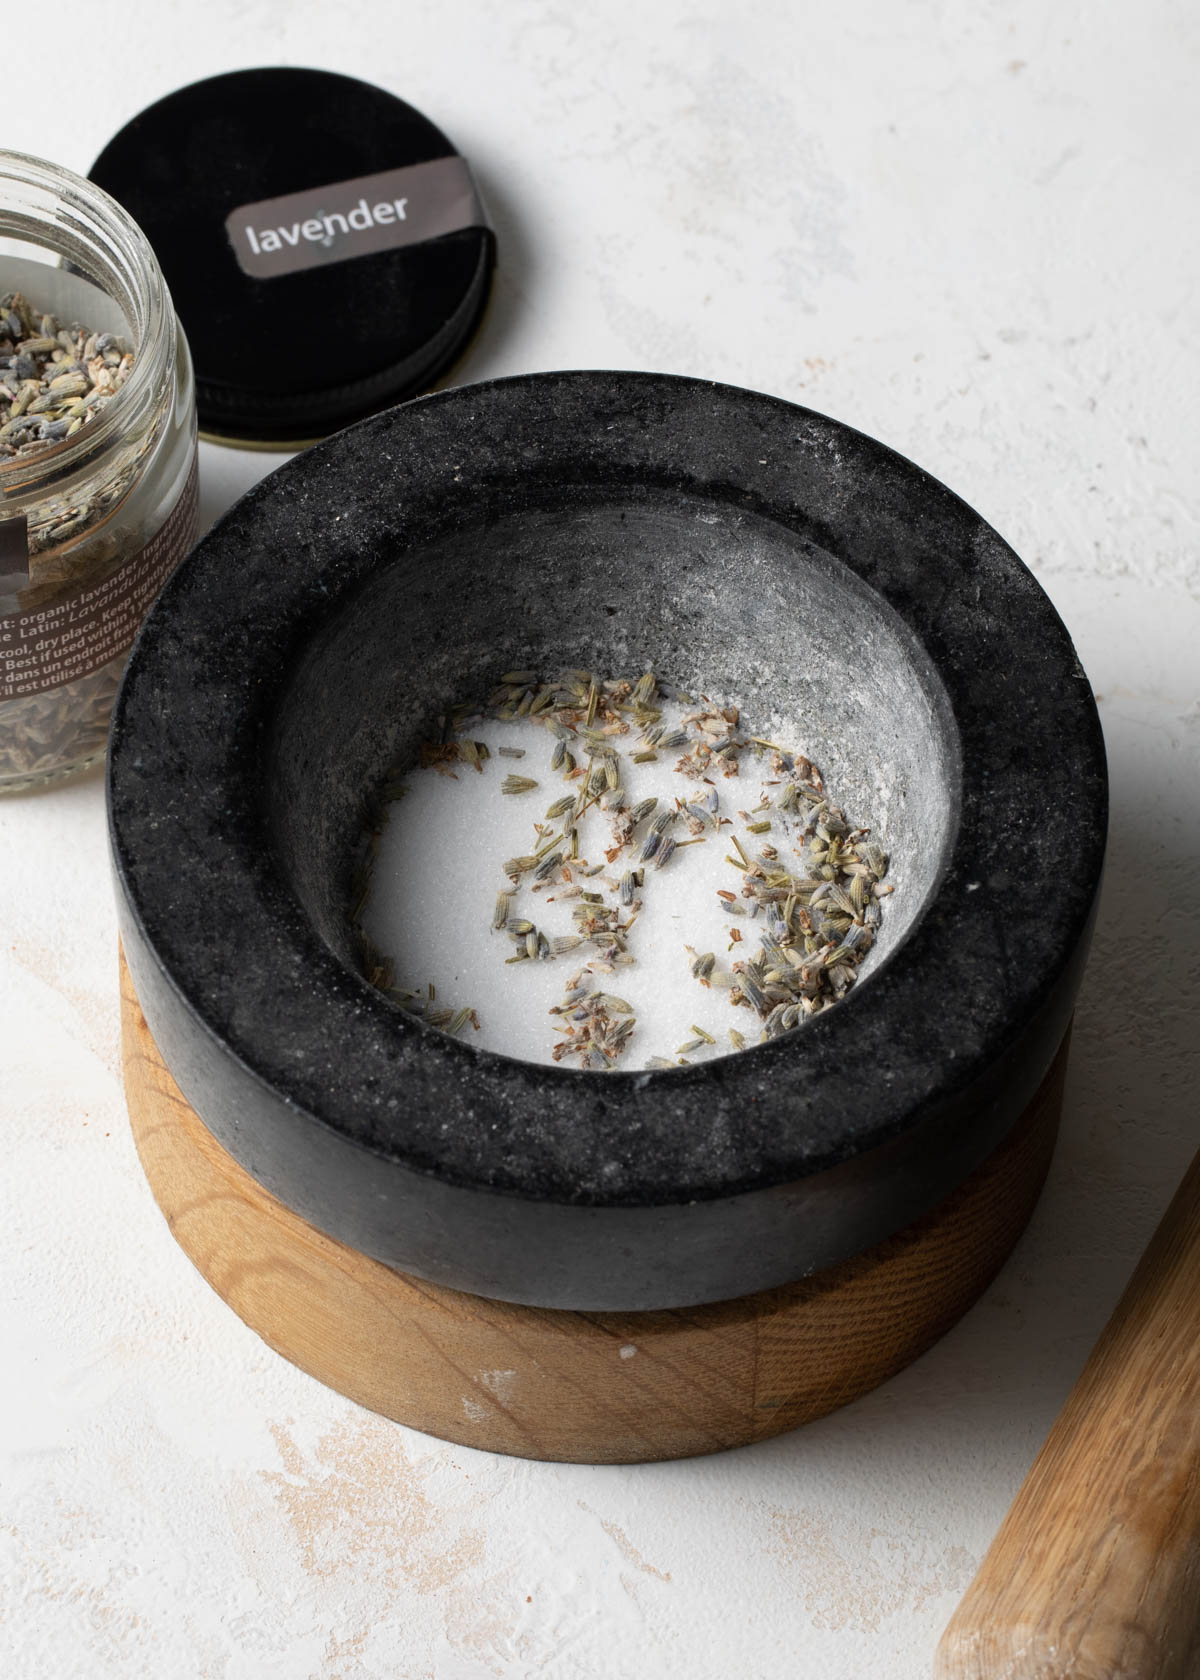 Dried lavender and sugar in a mortar and pestle